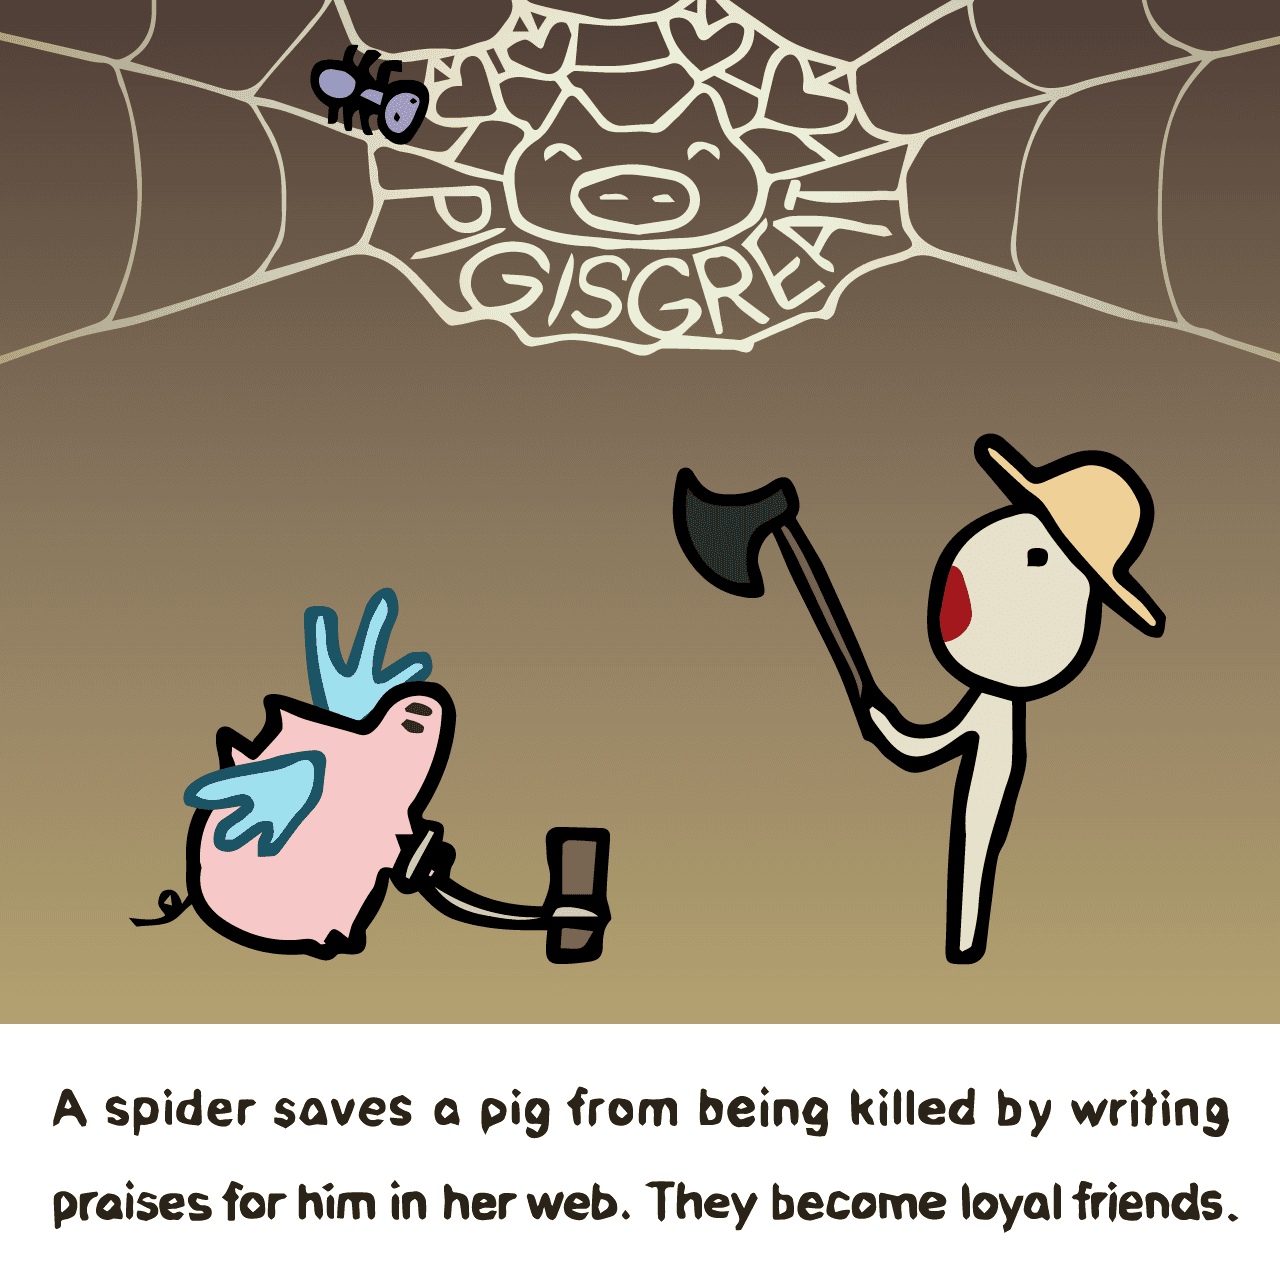 E. B. White "Charlotte's Web : A spider saves a pig from being killed by writing praises for him in her web. They become loyal friends."